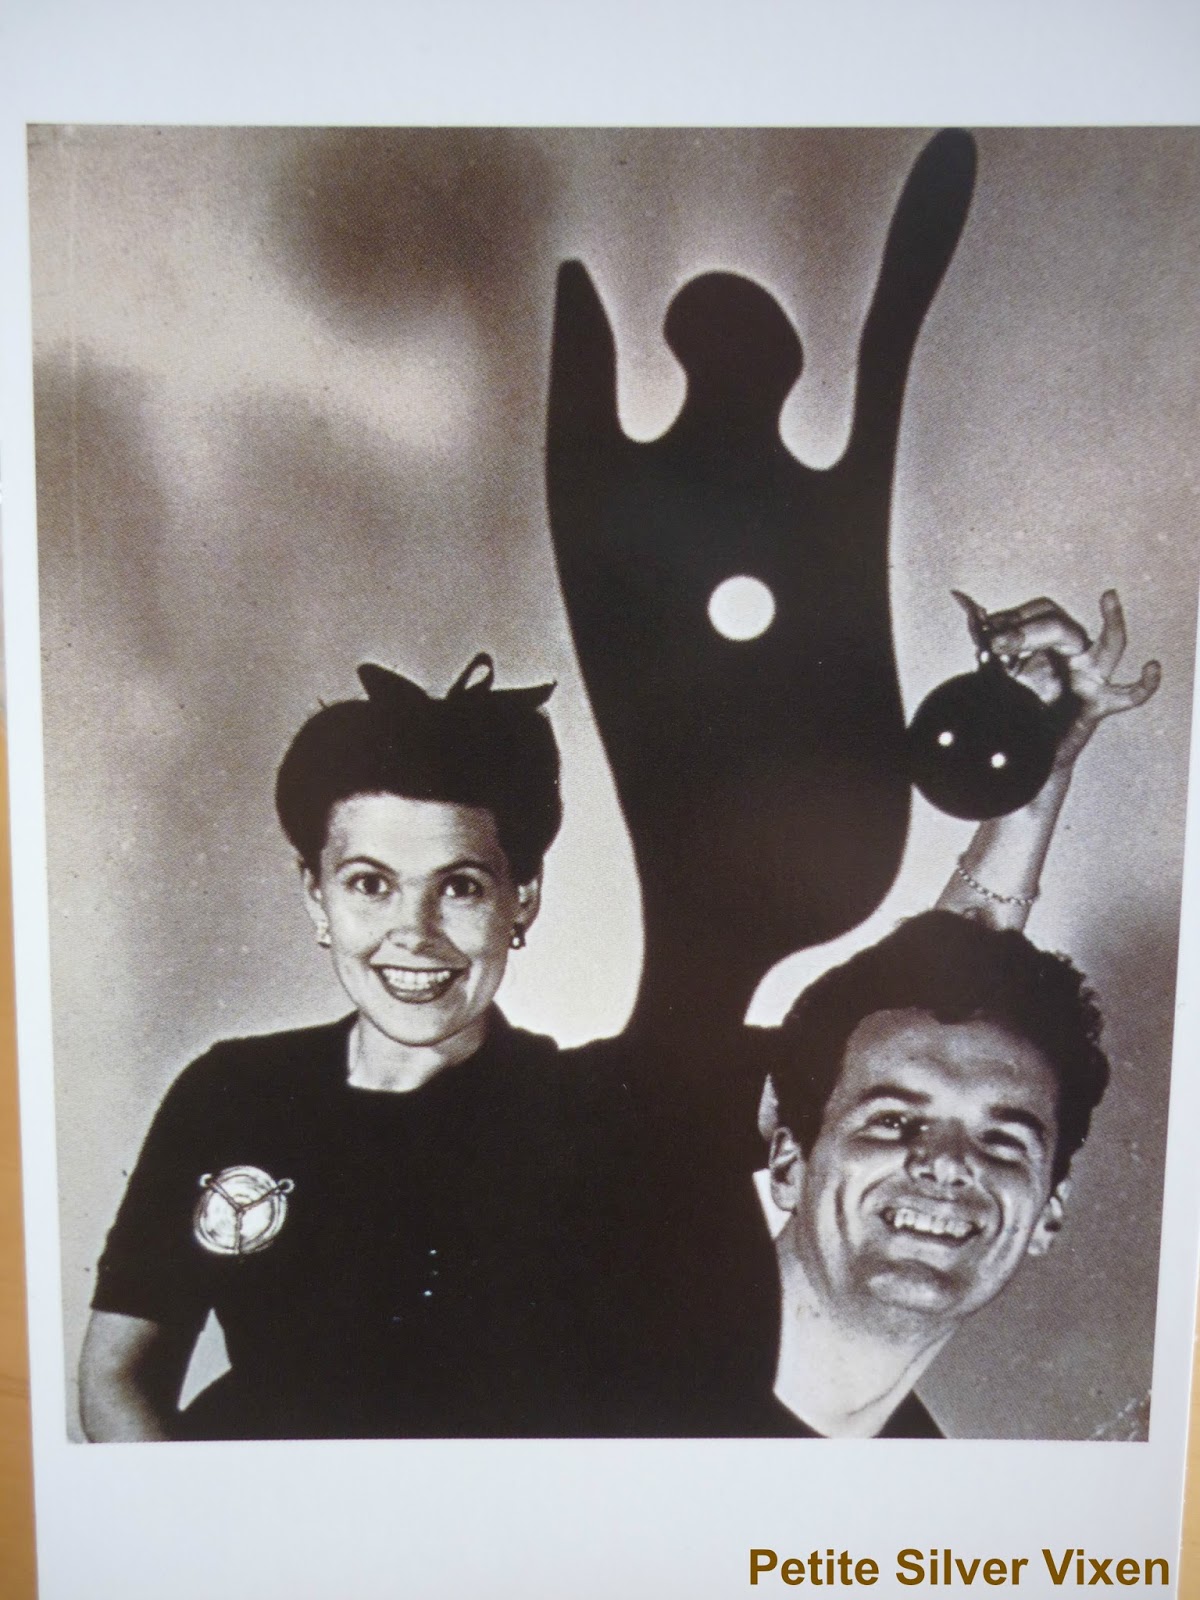 Exhibition Postcard of Charles and Ray Eames | Petite Silver Vixen